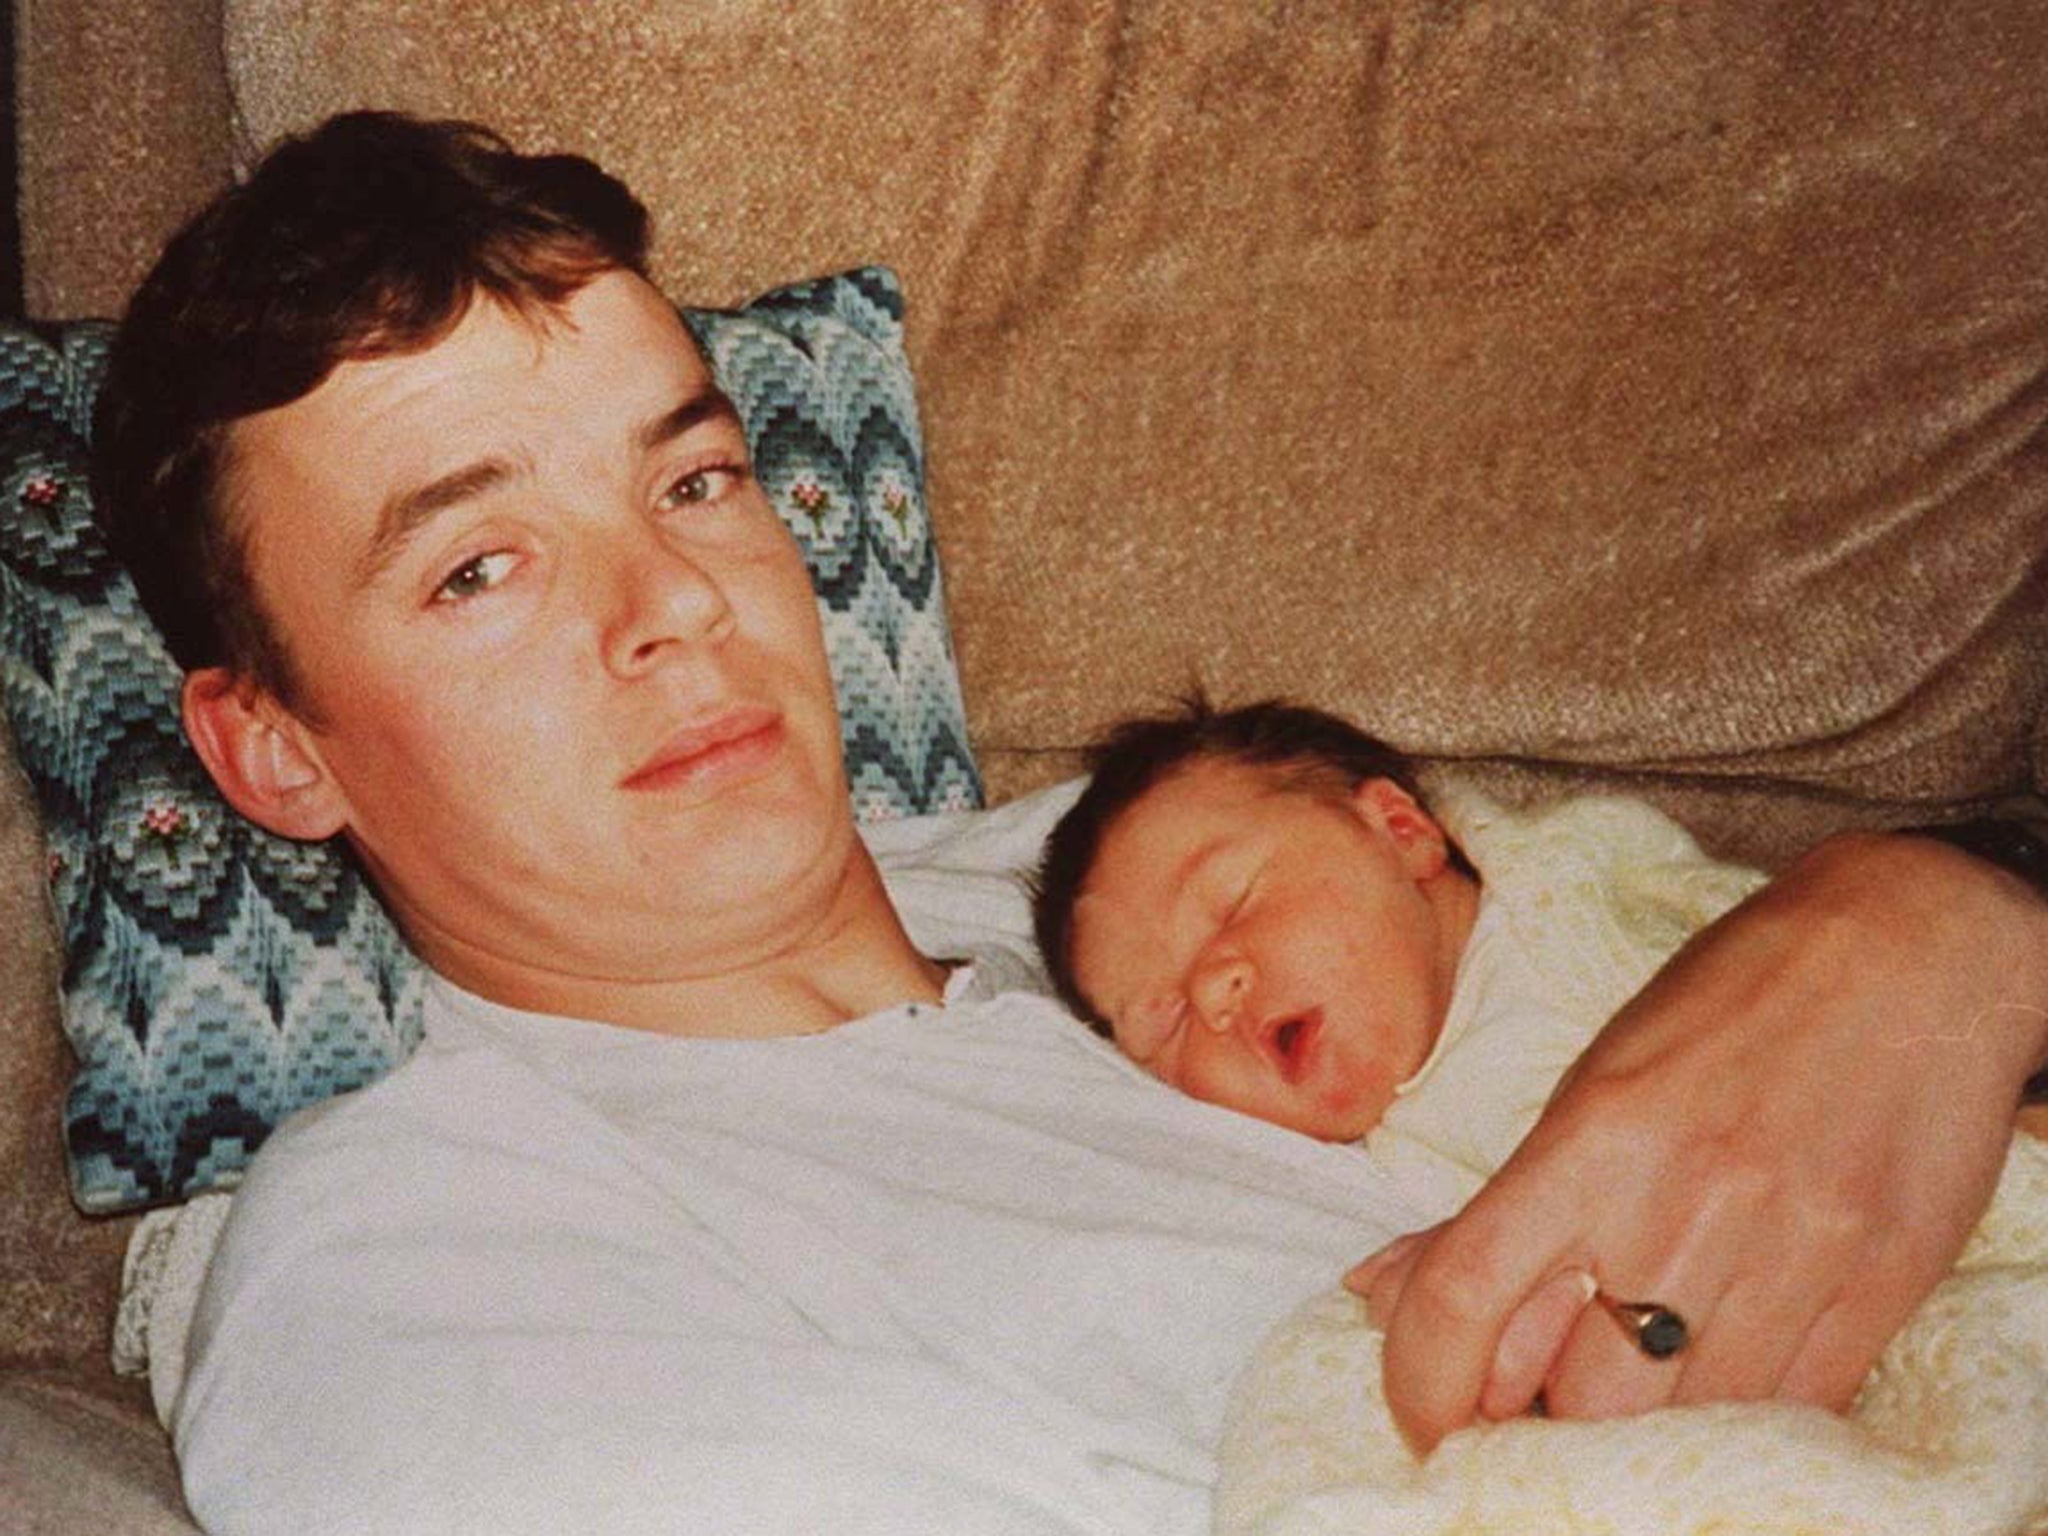 Simon Smith killed his daughter Lauren when she was three months old